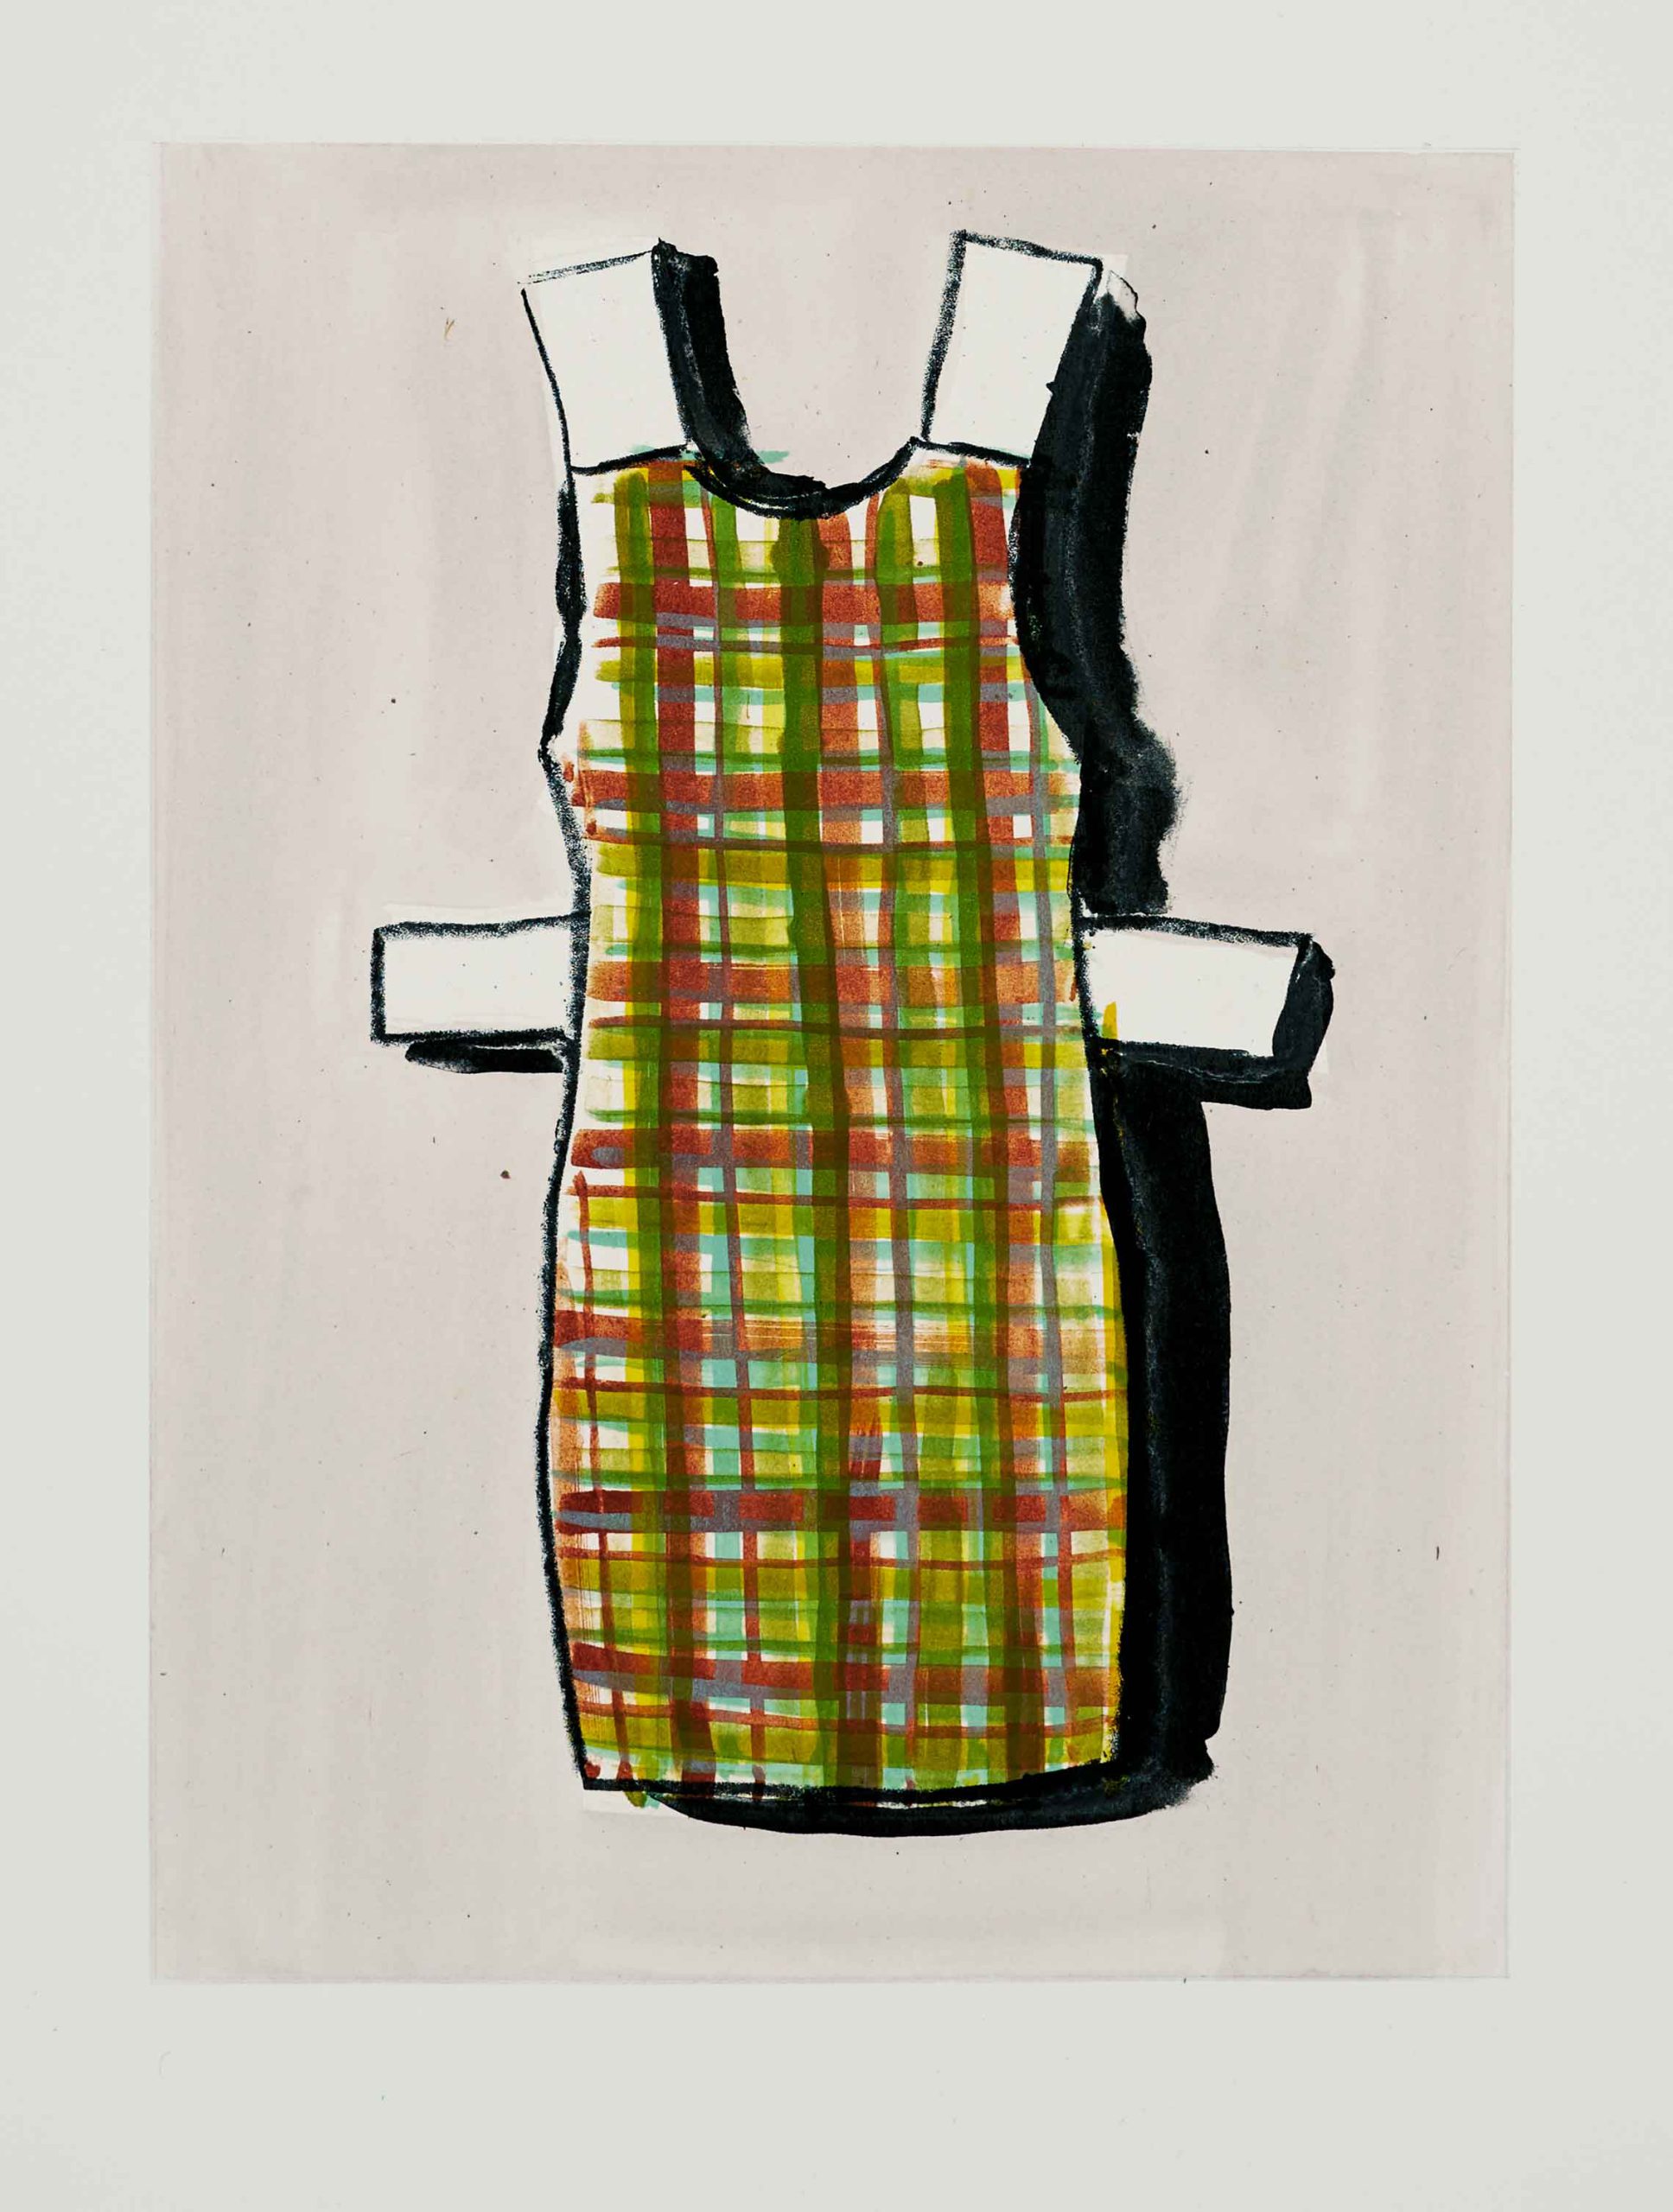 Outfit, 68 x 53 cm, Six-colour hand lithograph with chine colle Edition of 25, Signed by the artist and numbered on the back, published by Nutmeg Editions, 2016, POA